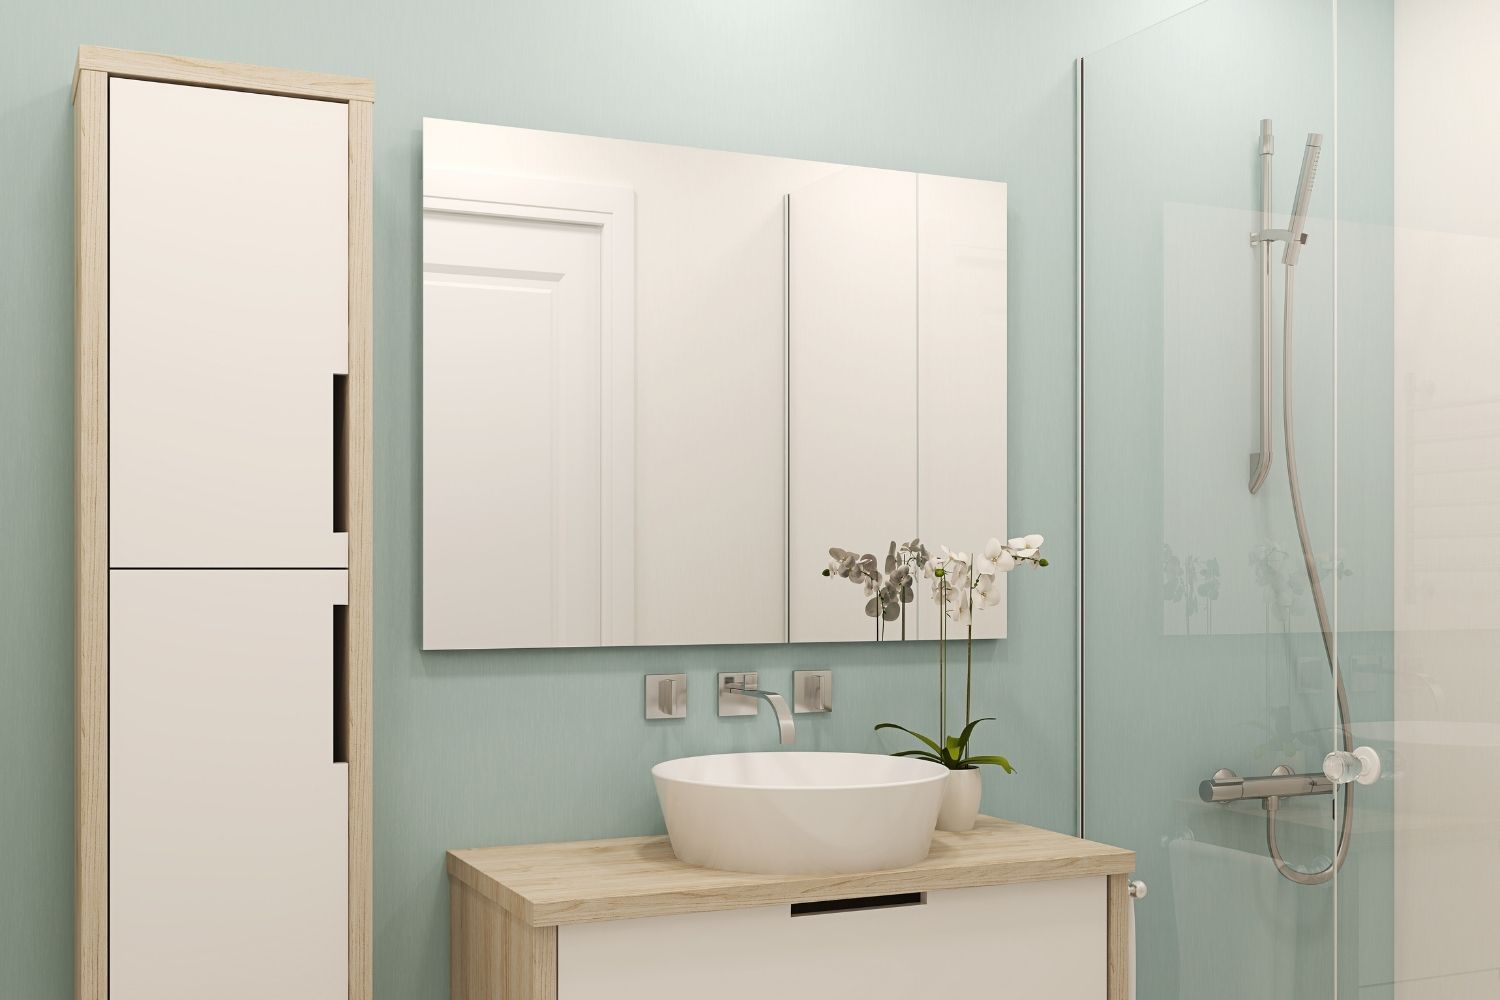 13 Of The Best Paint Colors For Small, Small Bathroom Paint Colors 2021